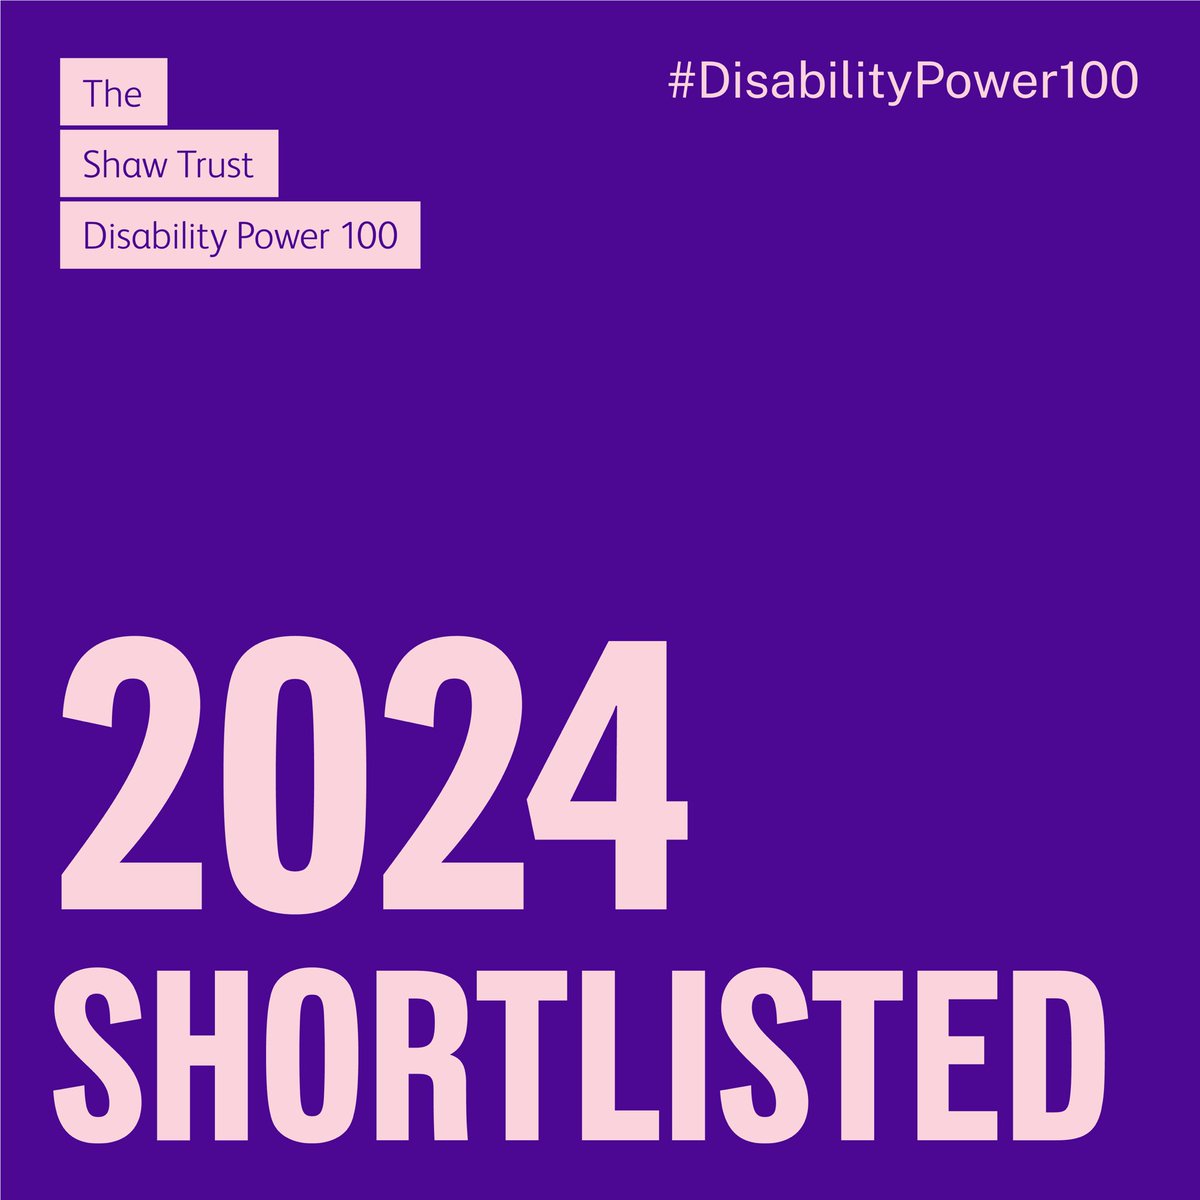 I’m delighted to share that I’ve been shortlisted for this year’s @ShawTrust #DisabilityPower100!

The Disability Power 100 is the annual list of the most influential disabled people in the UK.

What a lovely surprise!